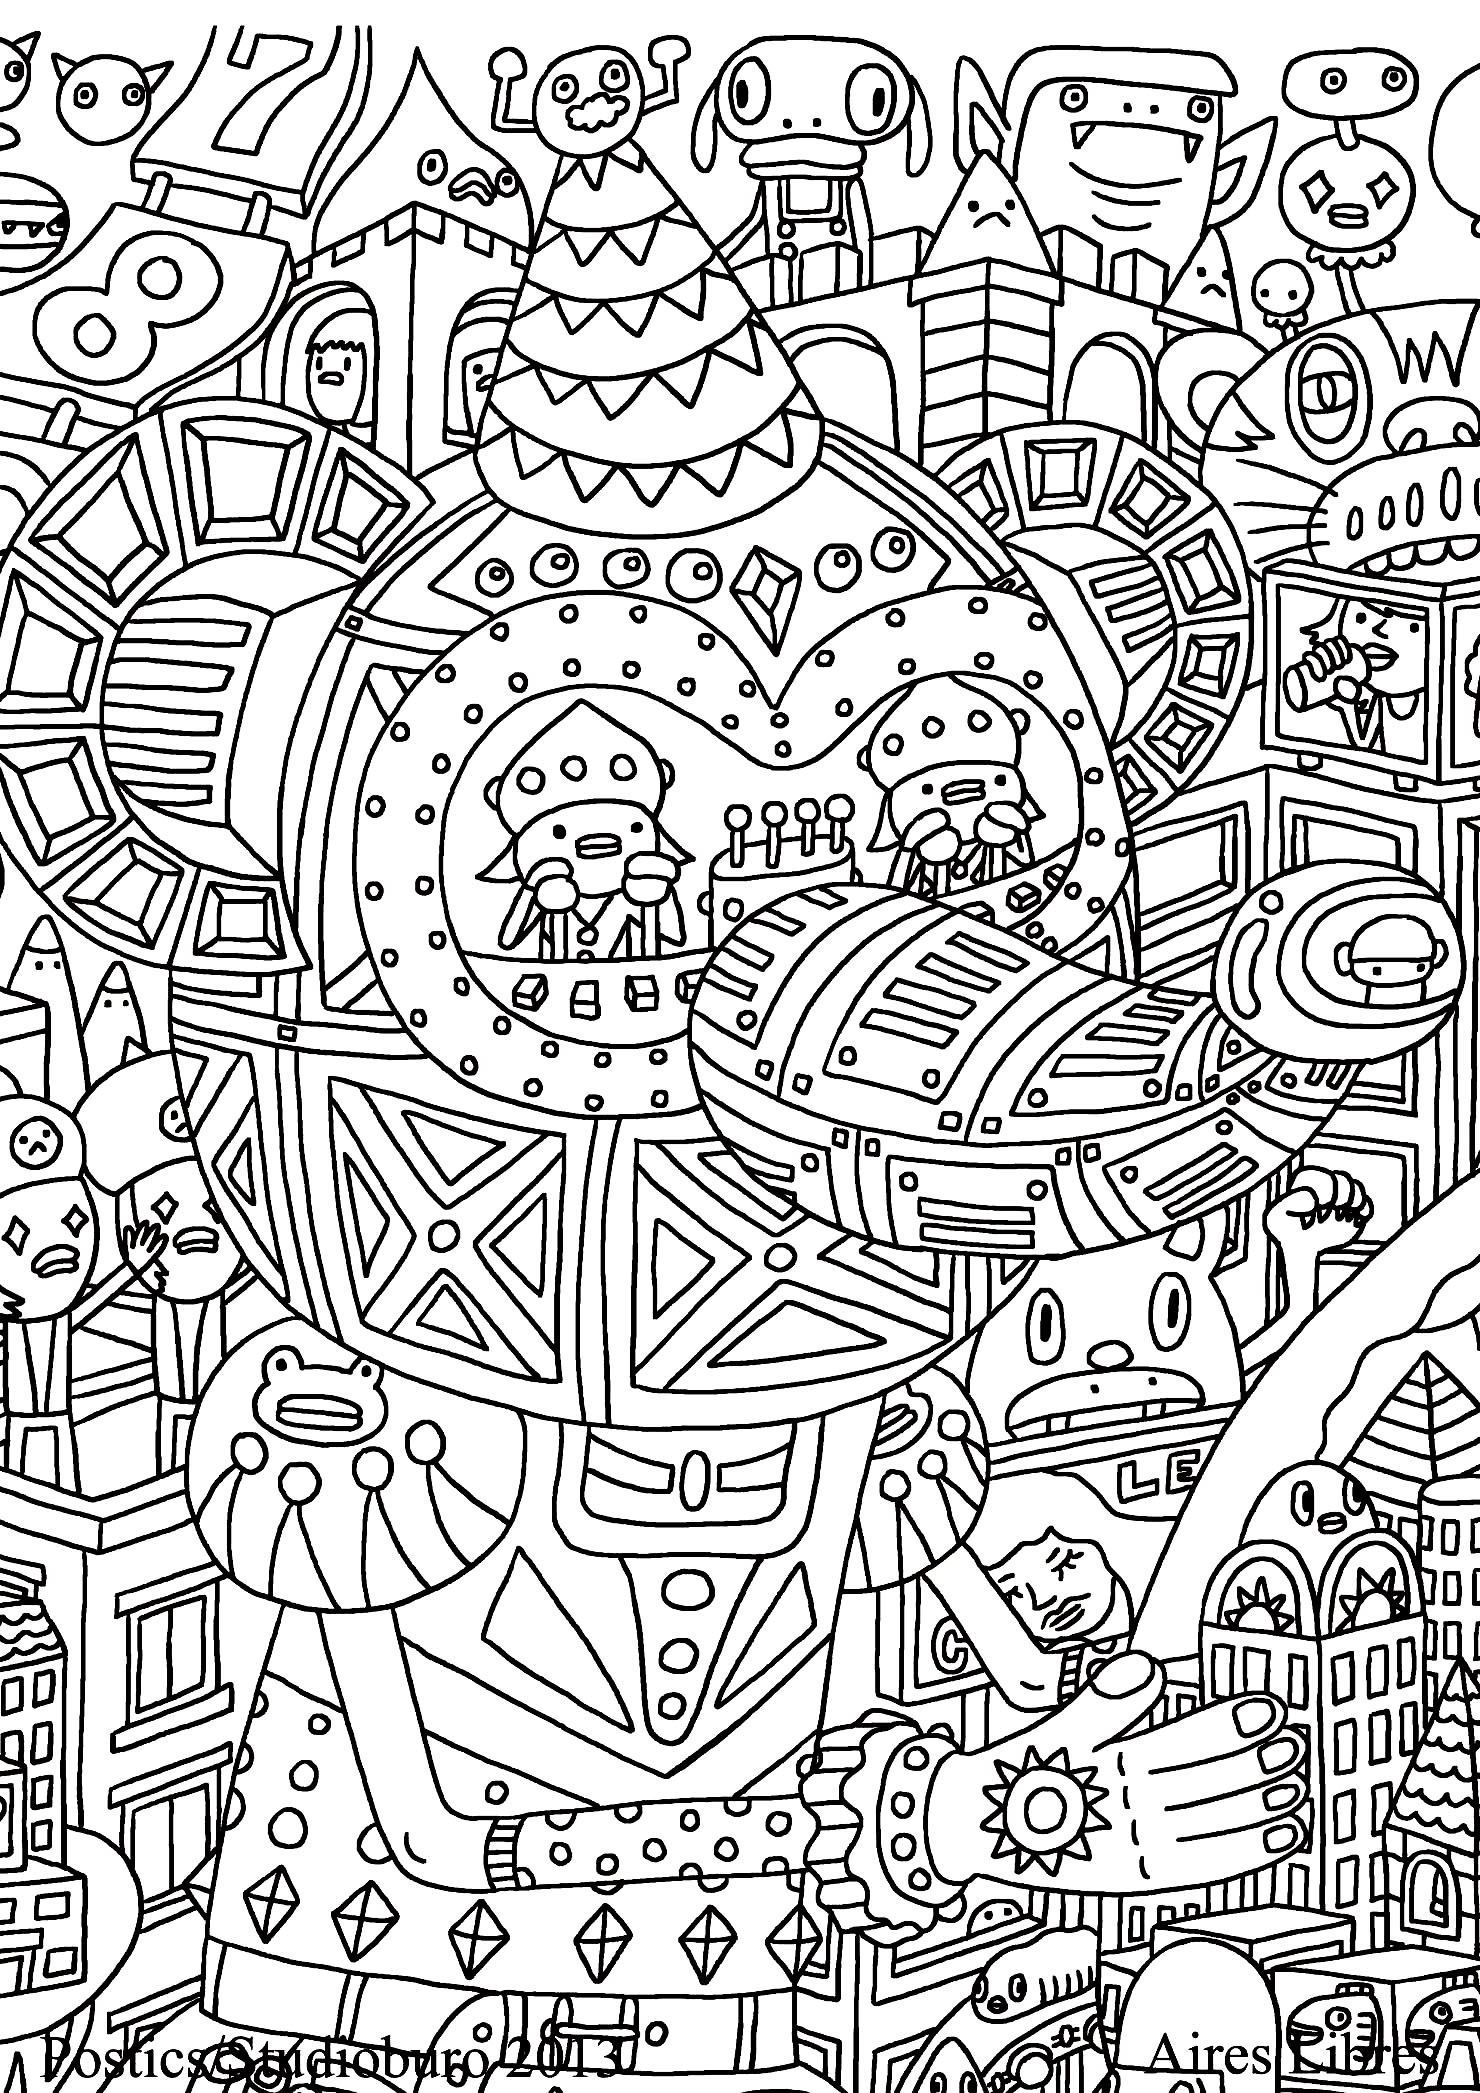 Doodle art doodling 10  Doodle Art / Doodling Adult Coloring Pages